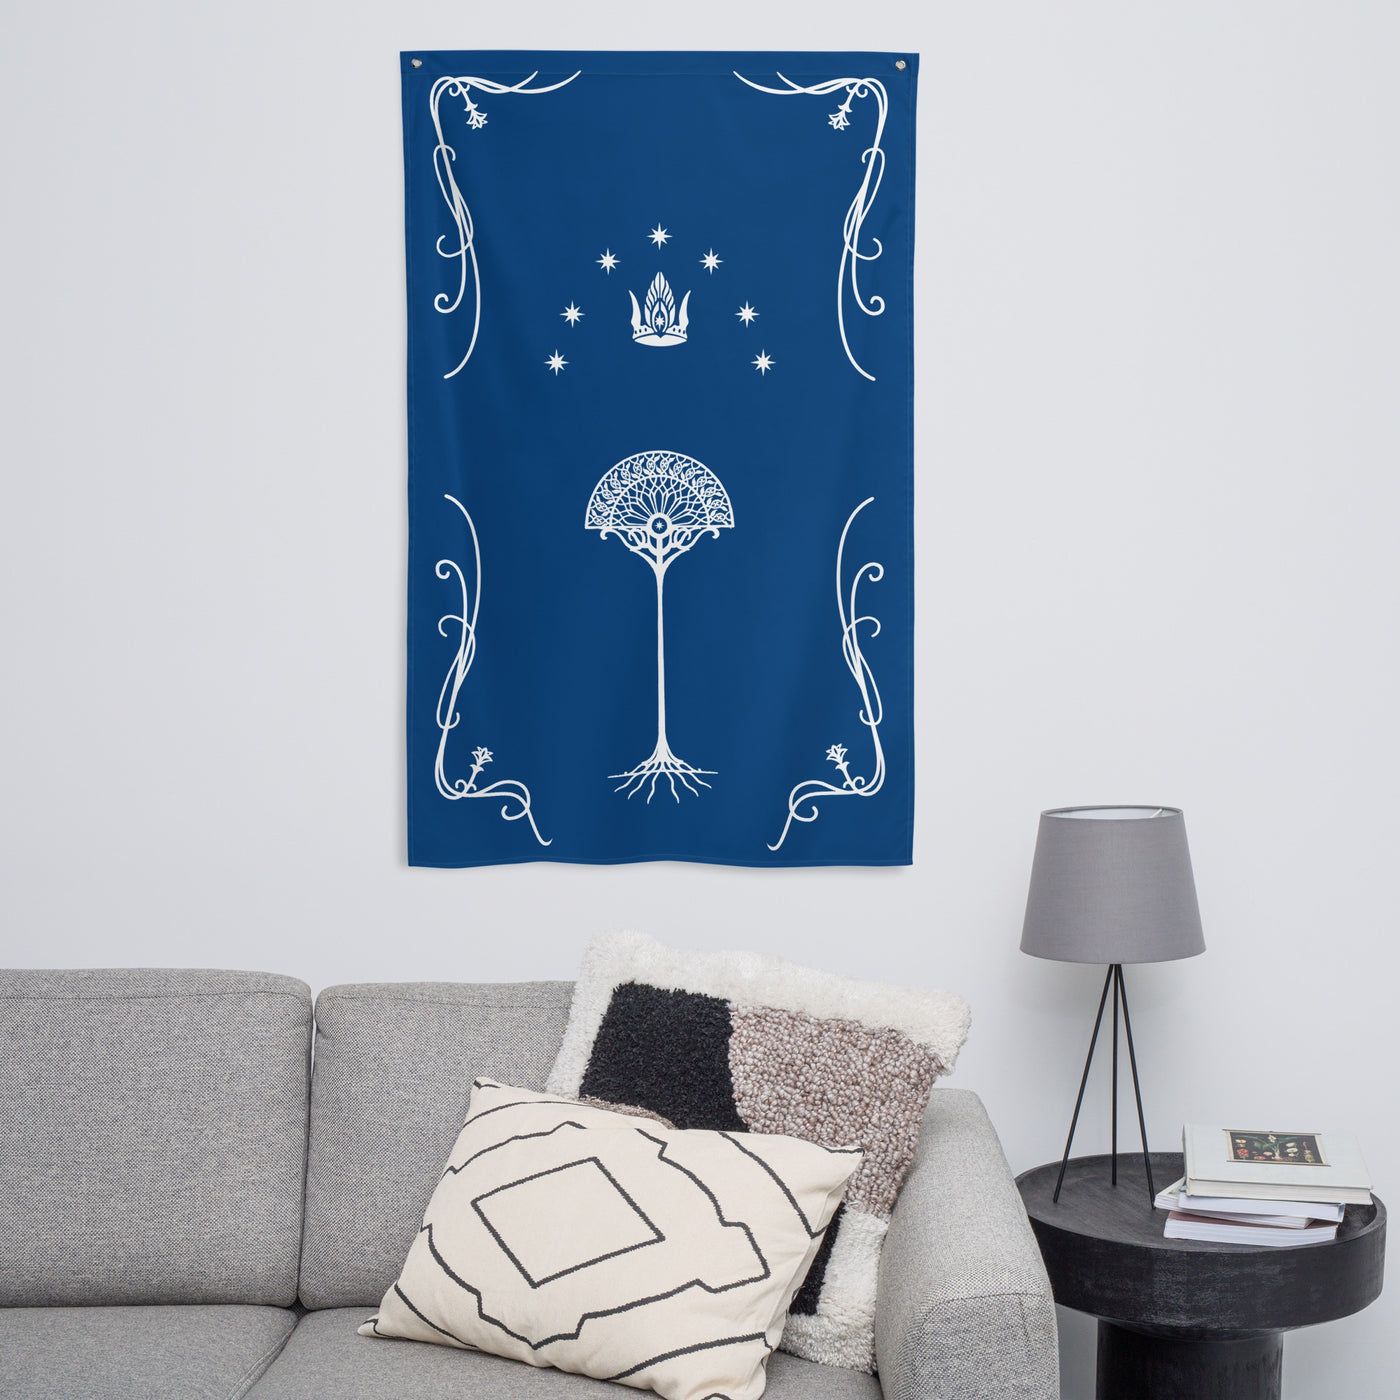 The Lord of the Rings Tree of Gondor Banner